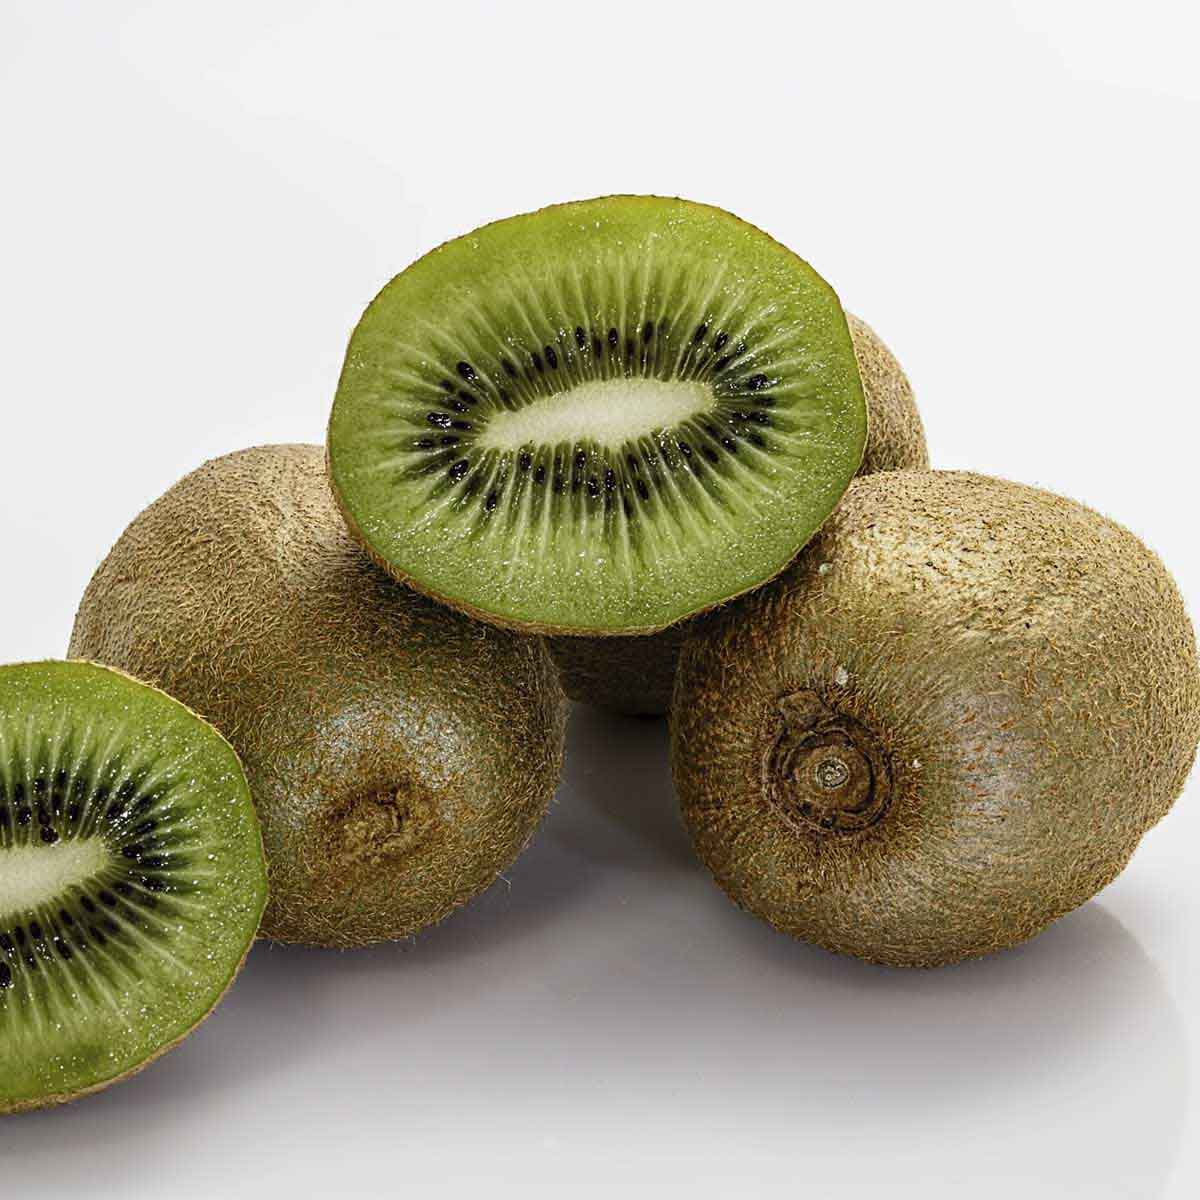 Ripe kiwis on table, some sliced in half to show ripe green and black inside.